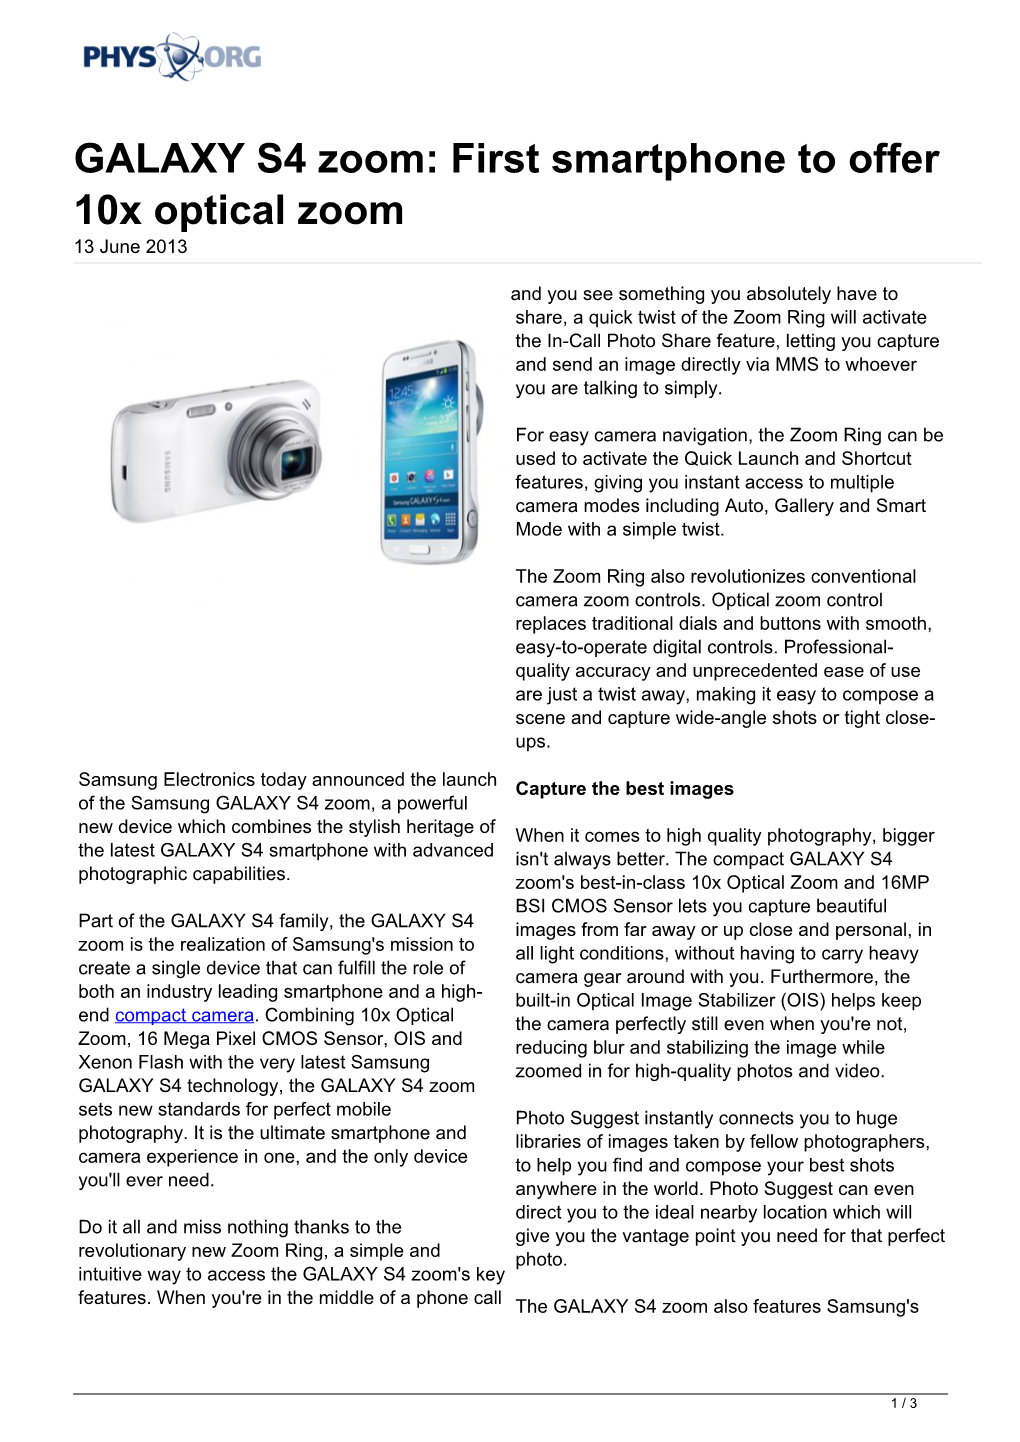 GALAXY S4 Zoom: First Smartphone to Offer 10X Optical Zoom 13 June 2013